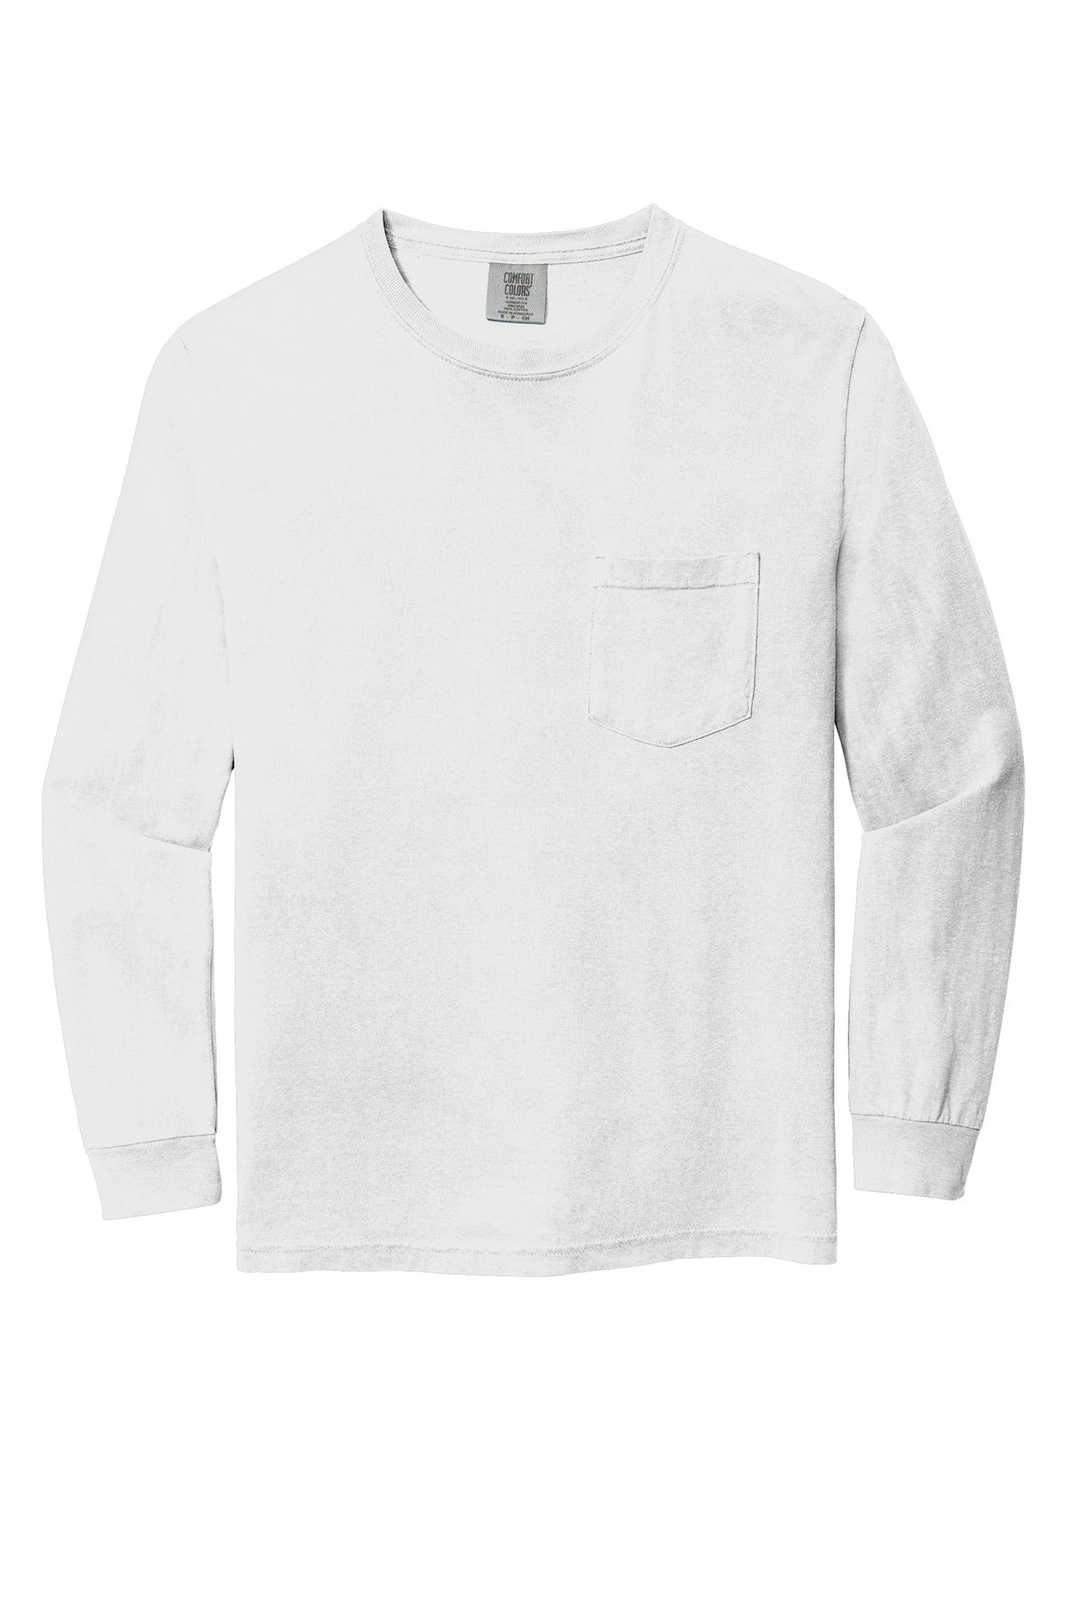 Comfort Colors 4410 Heavyweight Ring Spun Long Sleeve Pocket Tee - White - HIT a Double